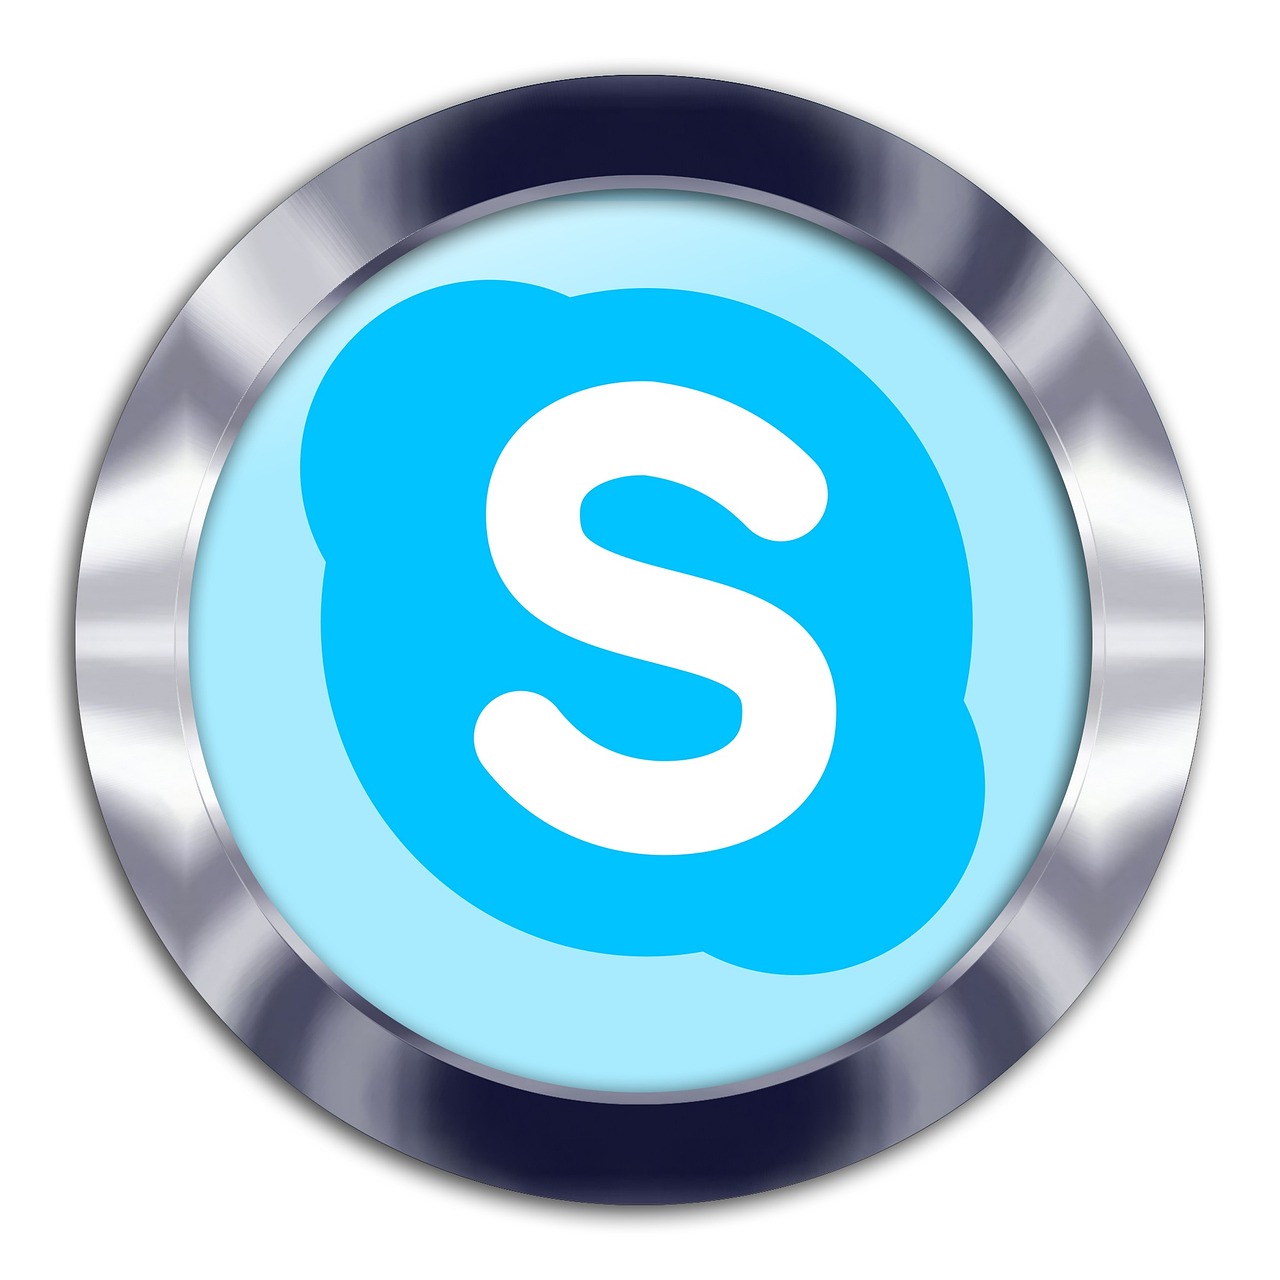 a blue button with the letter s on it, a stock photo, stuckism, snapchat photo, silver and blue colors, telephone, marketing photo